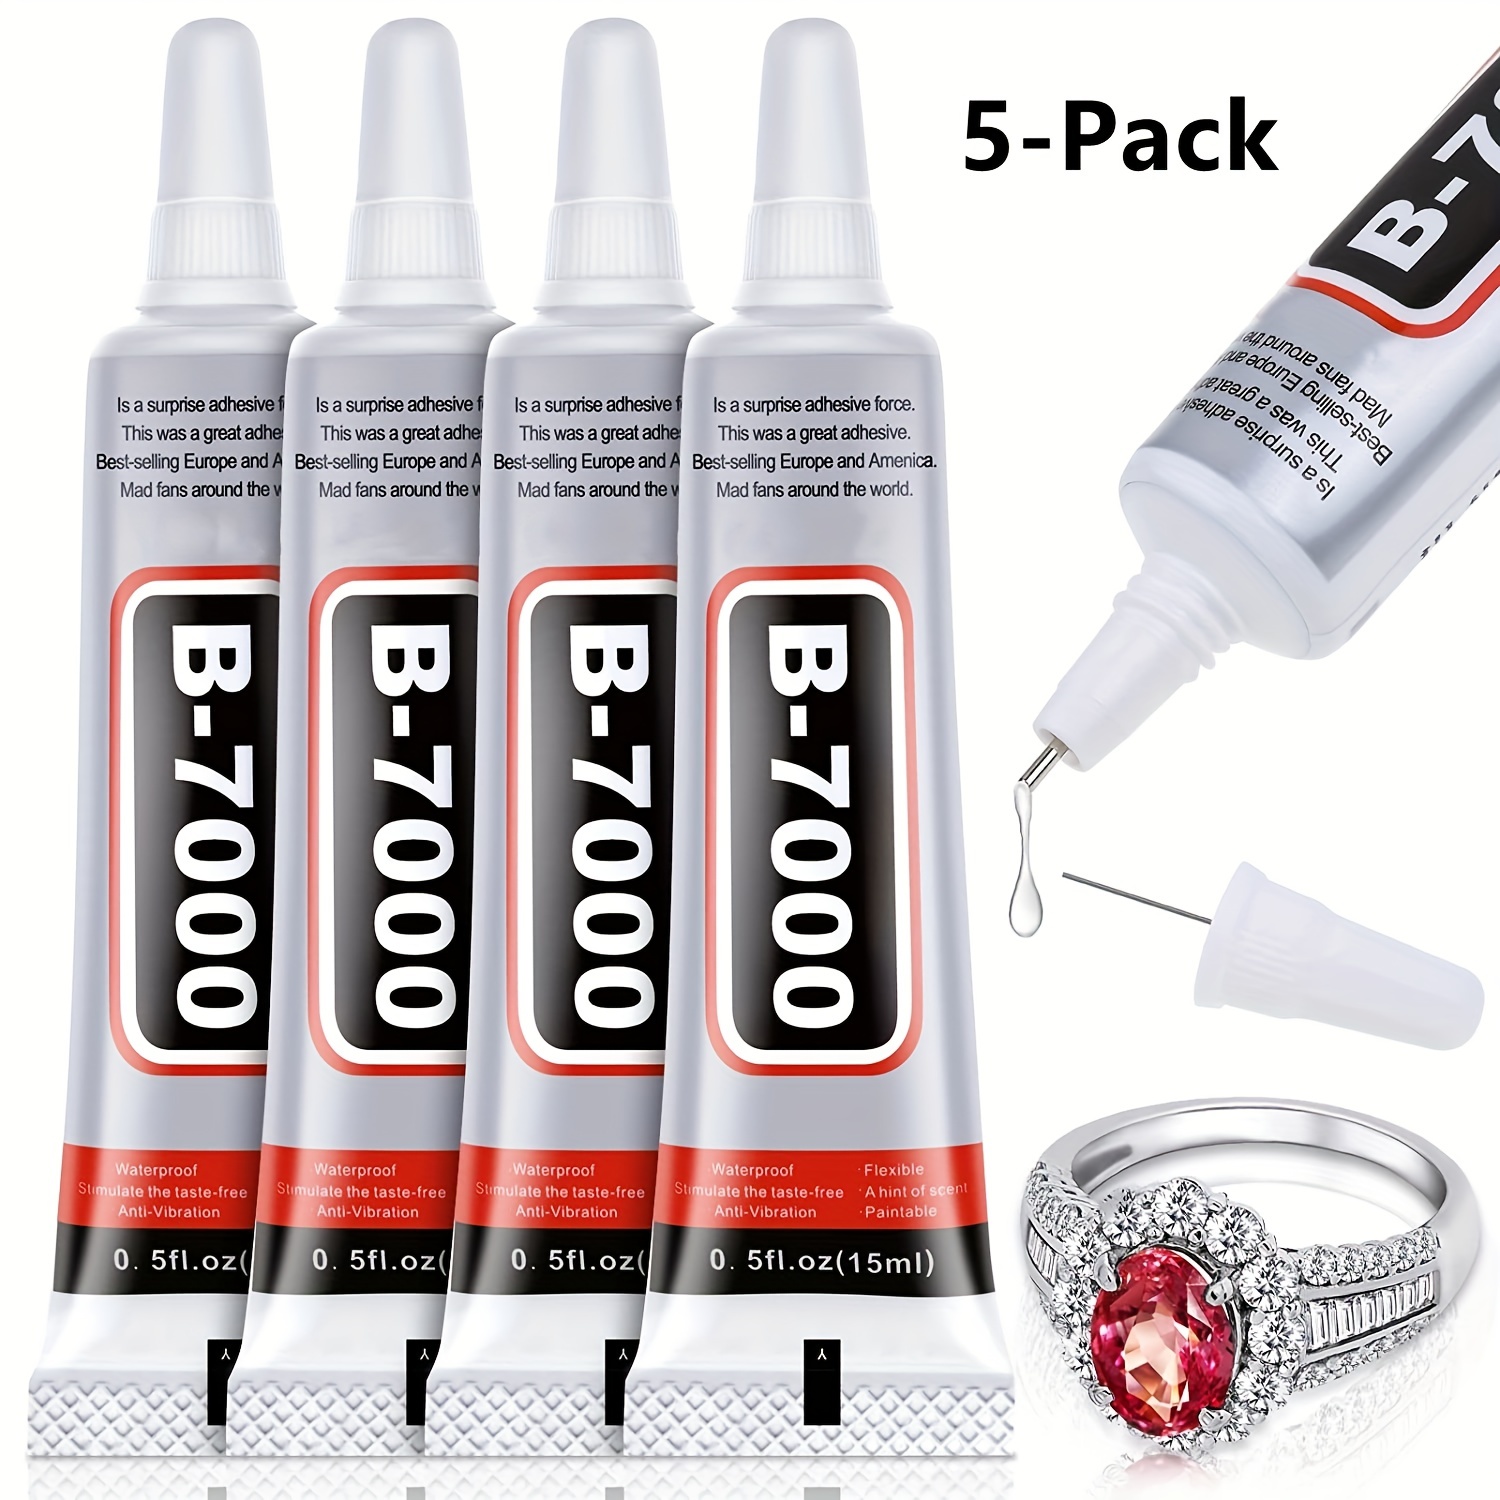 E8000 Craft Glue for Jewelry Making, Multi-Function B-7000 Super Adhesive  Glues Liquid Fusion for Rhinestones, Shoes, Fabric, Stone Wood Glass Cell  Phones with Dotting Pens and Tweezers(2 X 50ML) : Arts, Crafts & Sewing 